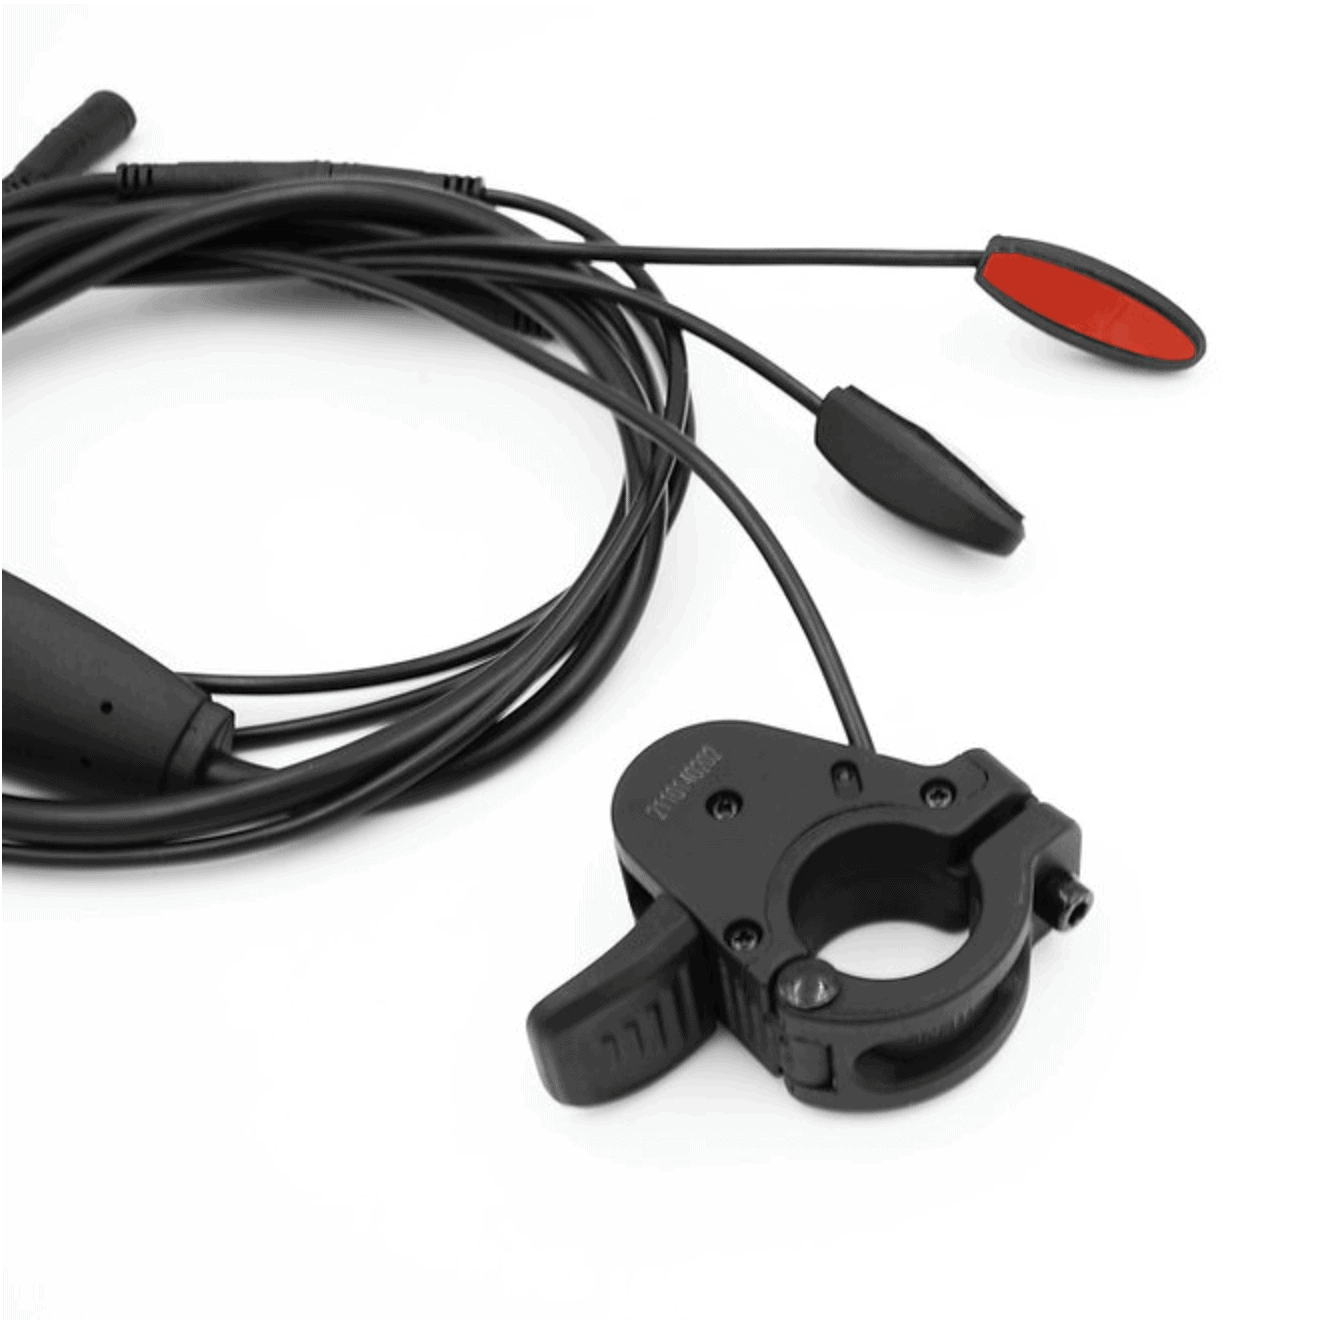 A black cord with two red wires and a black ring.